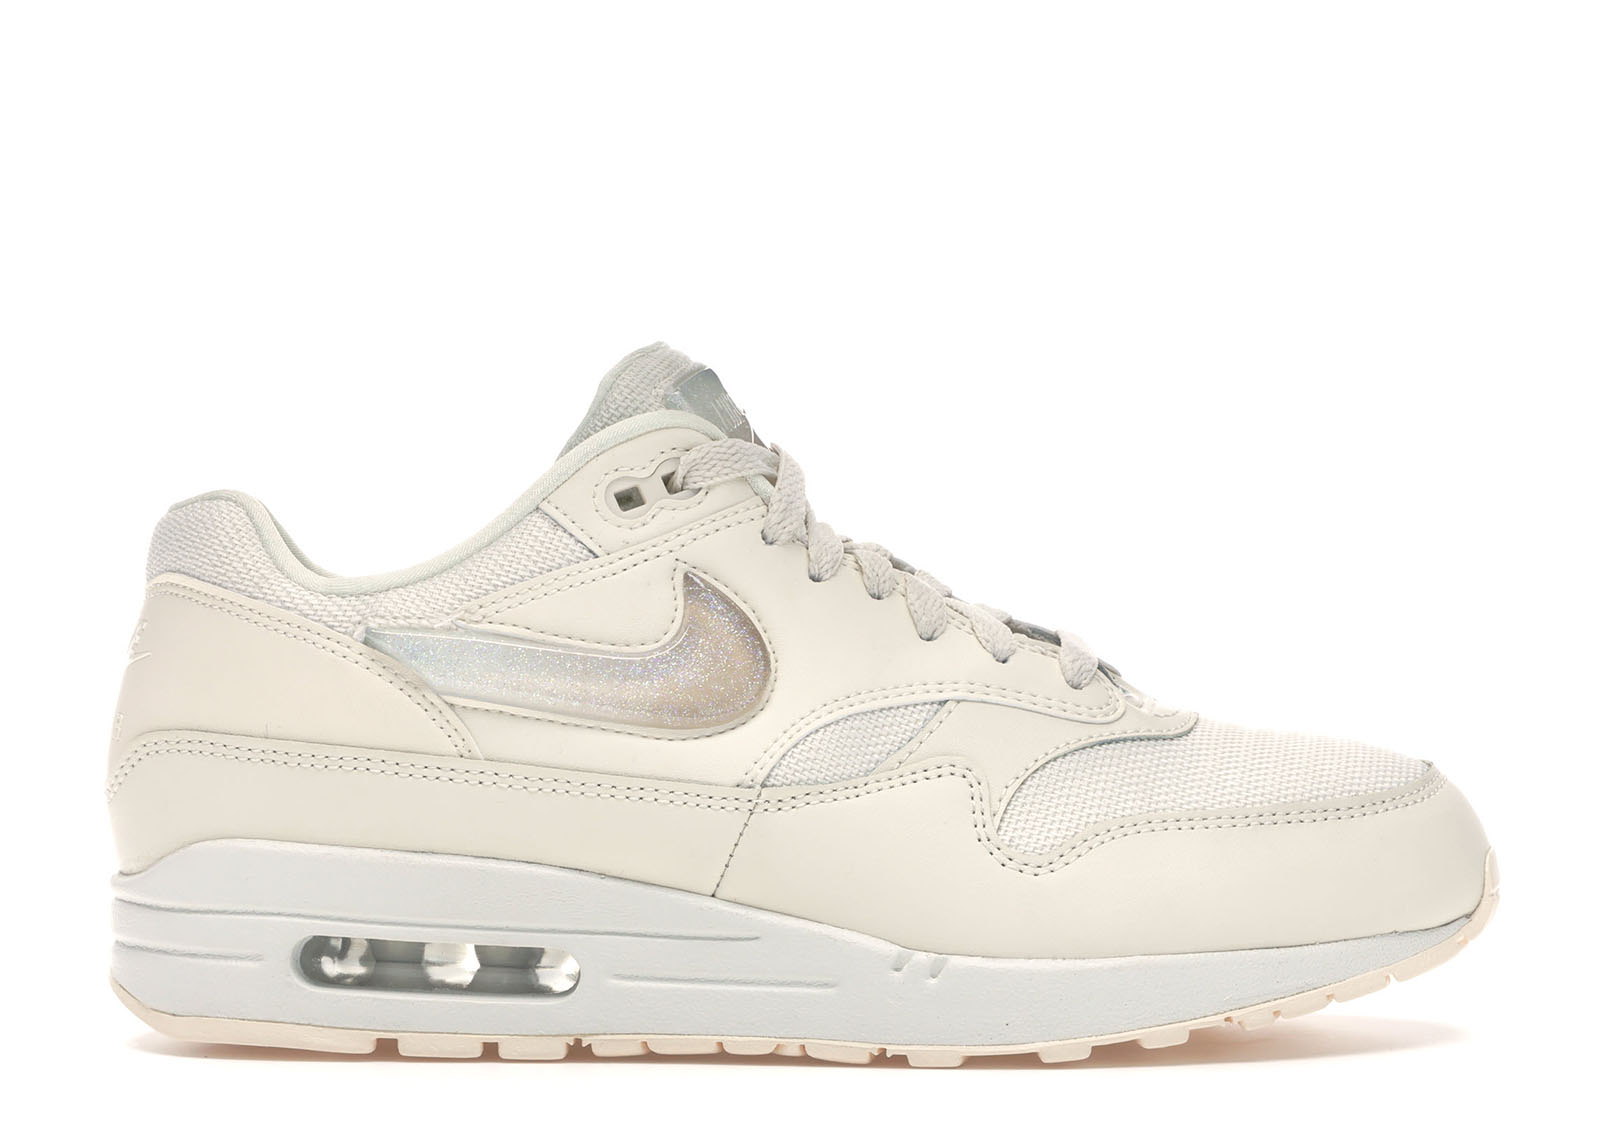 Nike Air Max 1 Jelly Puff Pale Ivory (W 